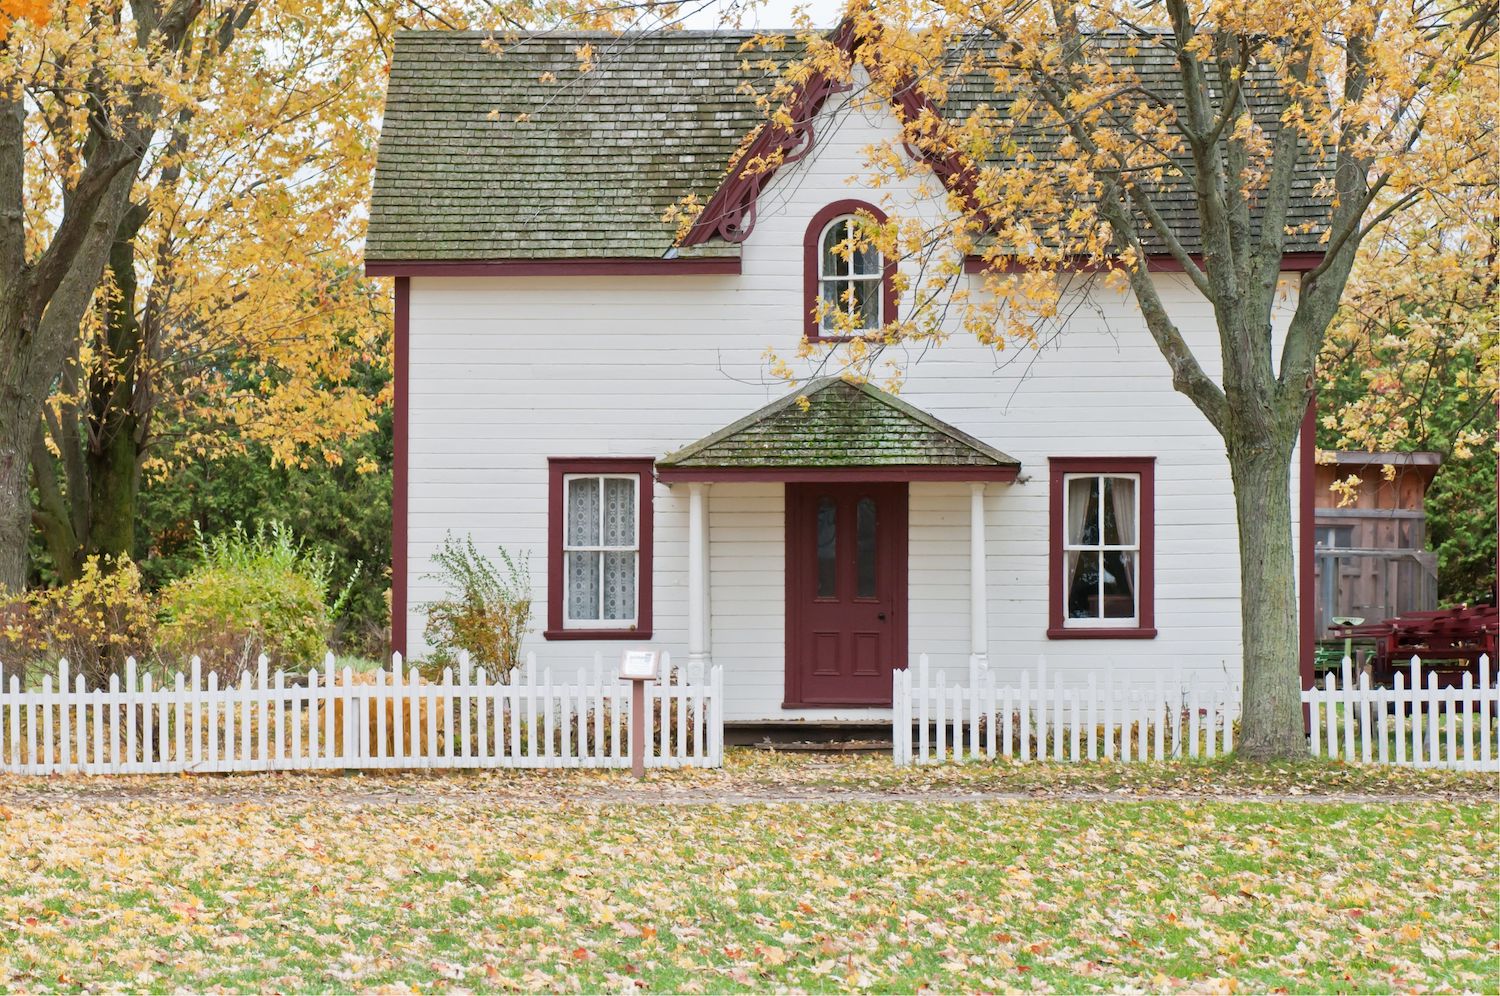 House in the fall as a reminder that it's time for furnace maintenance